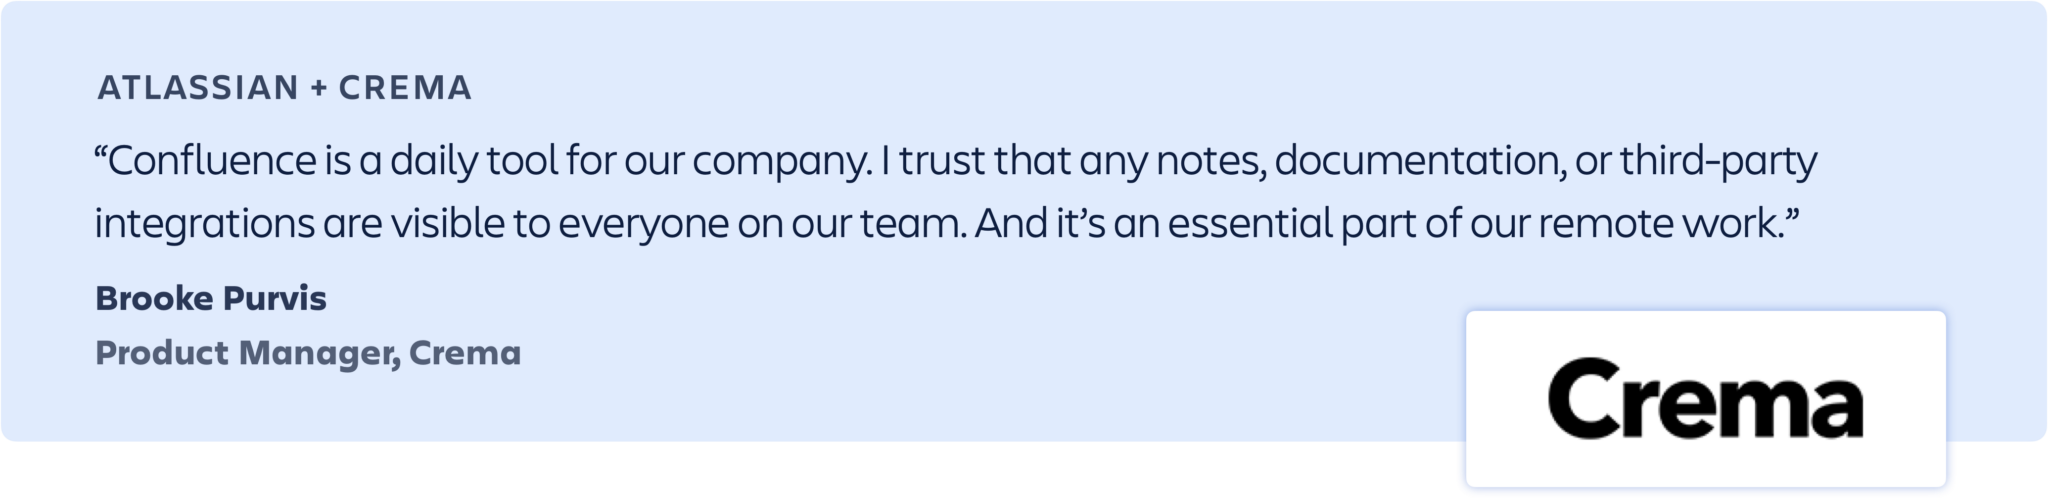 “Confluence is a daily tool for our company. I trust that any notes, documentation, or third-party integrations are visible to everyone on our team. And it’s an essential part of our remote work.” -Brooke Purvis, Product Manager, Crema